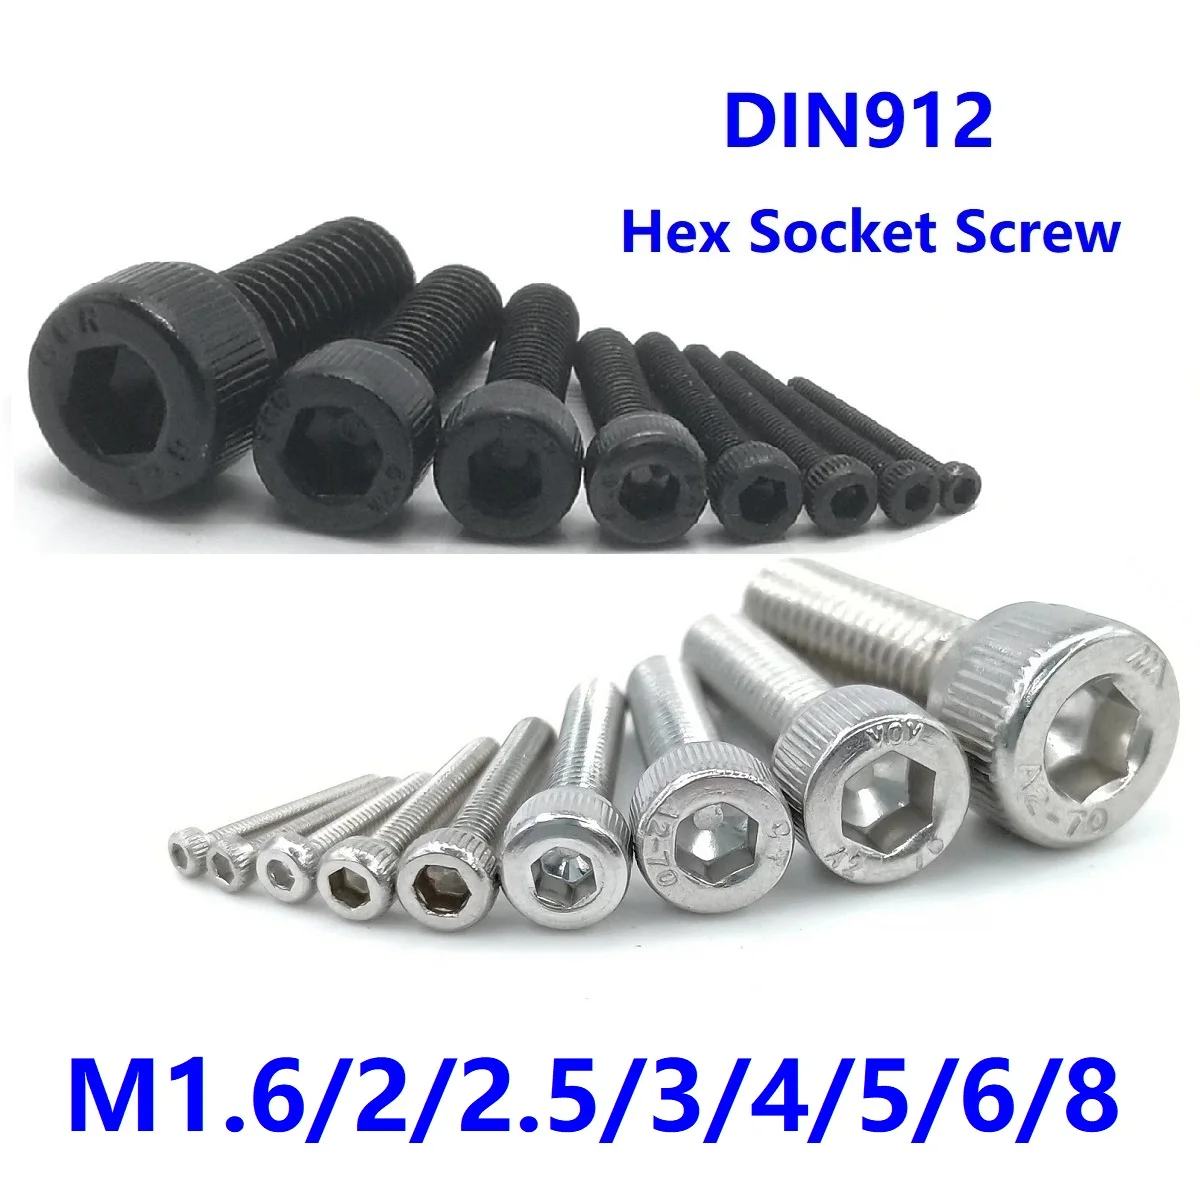 M3-M8 Stainless Steel Hex Socket Cap Head Screws with Hex Nut Washers Assortment 